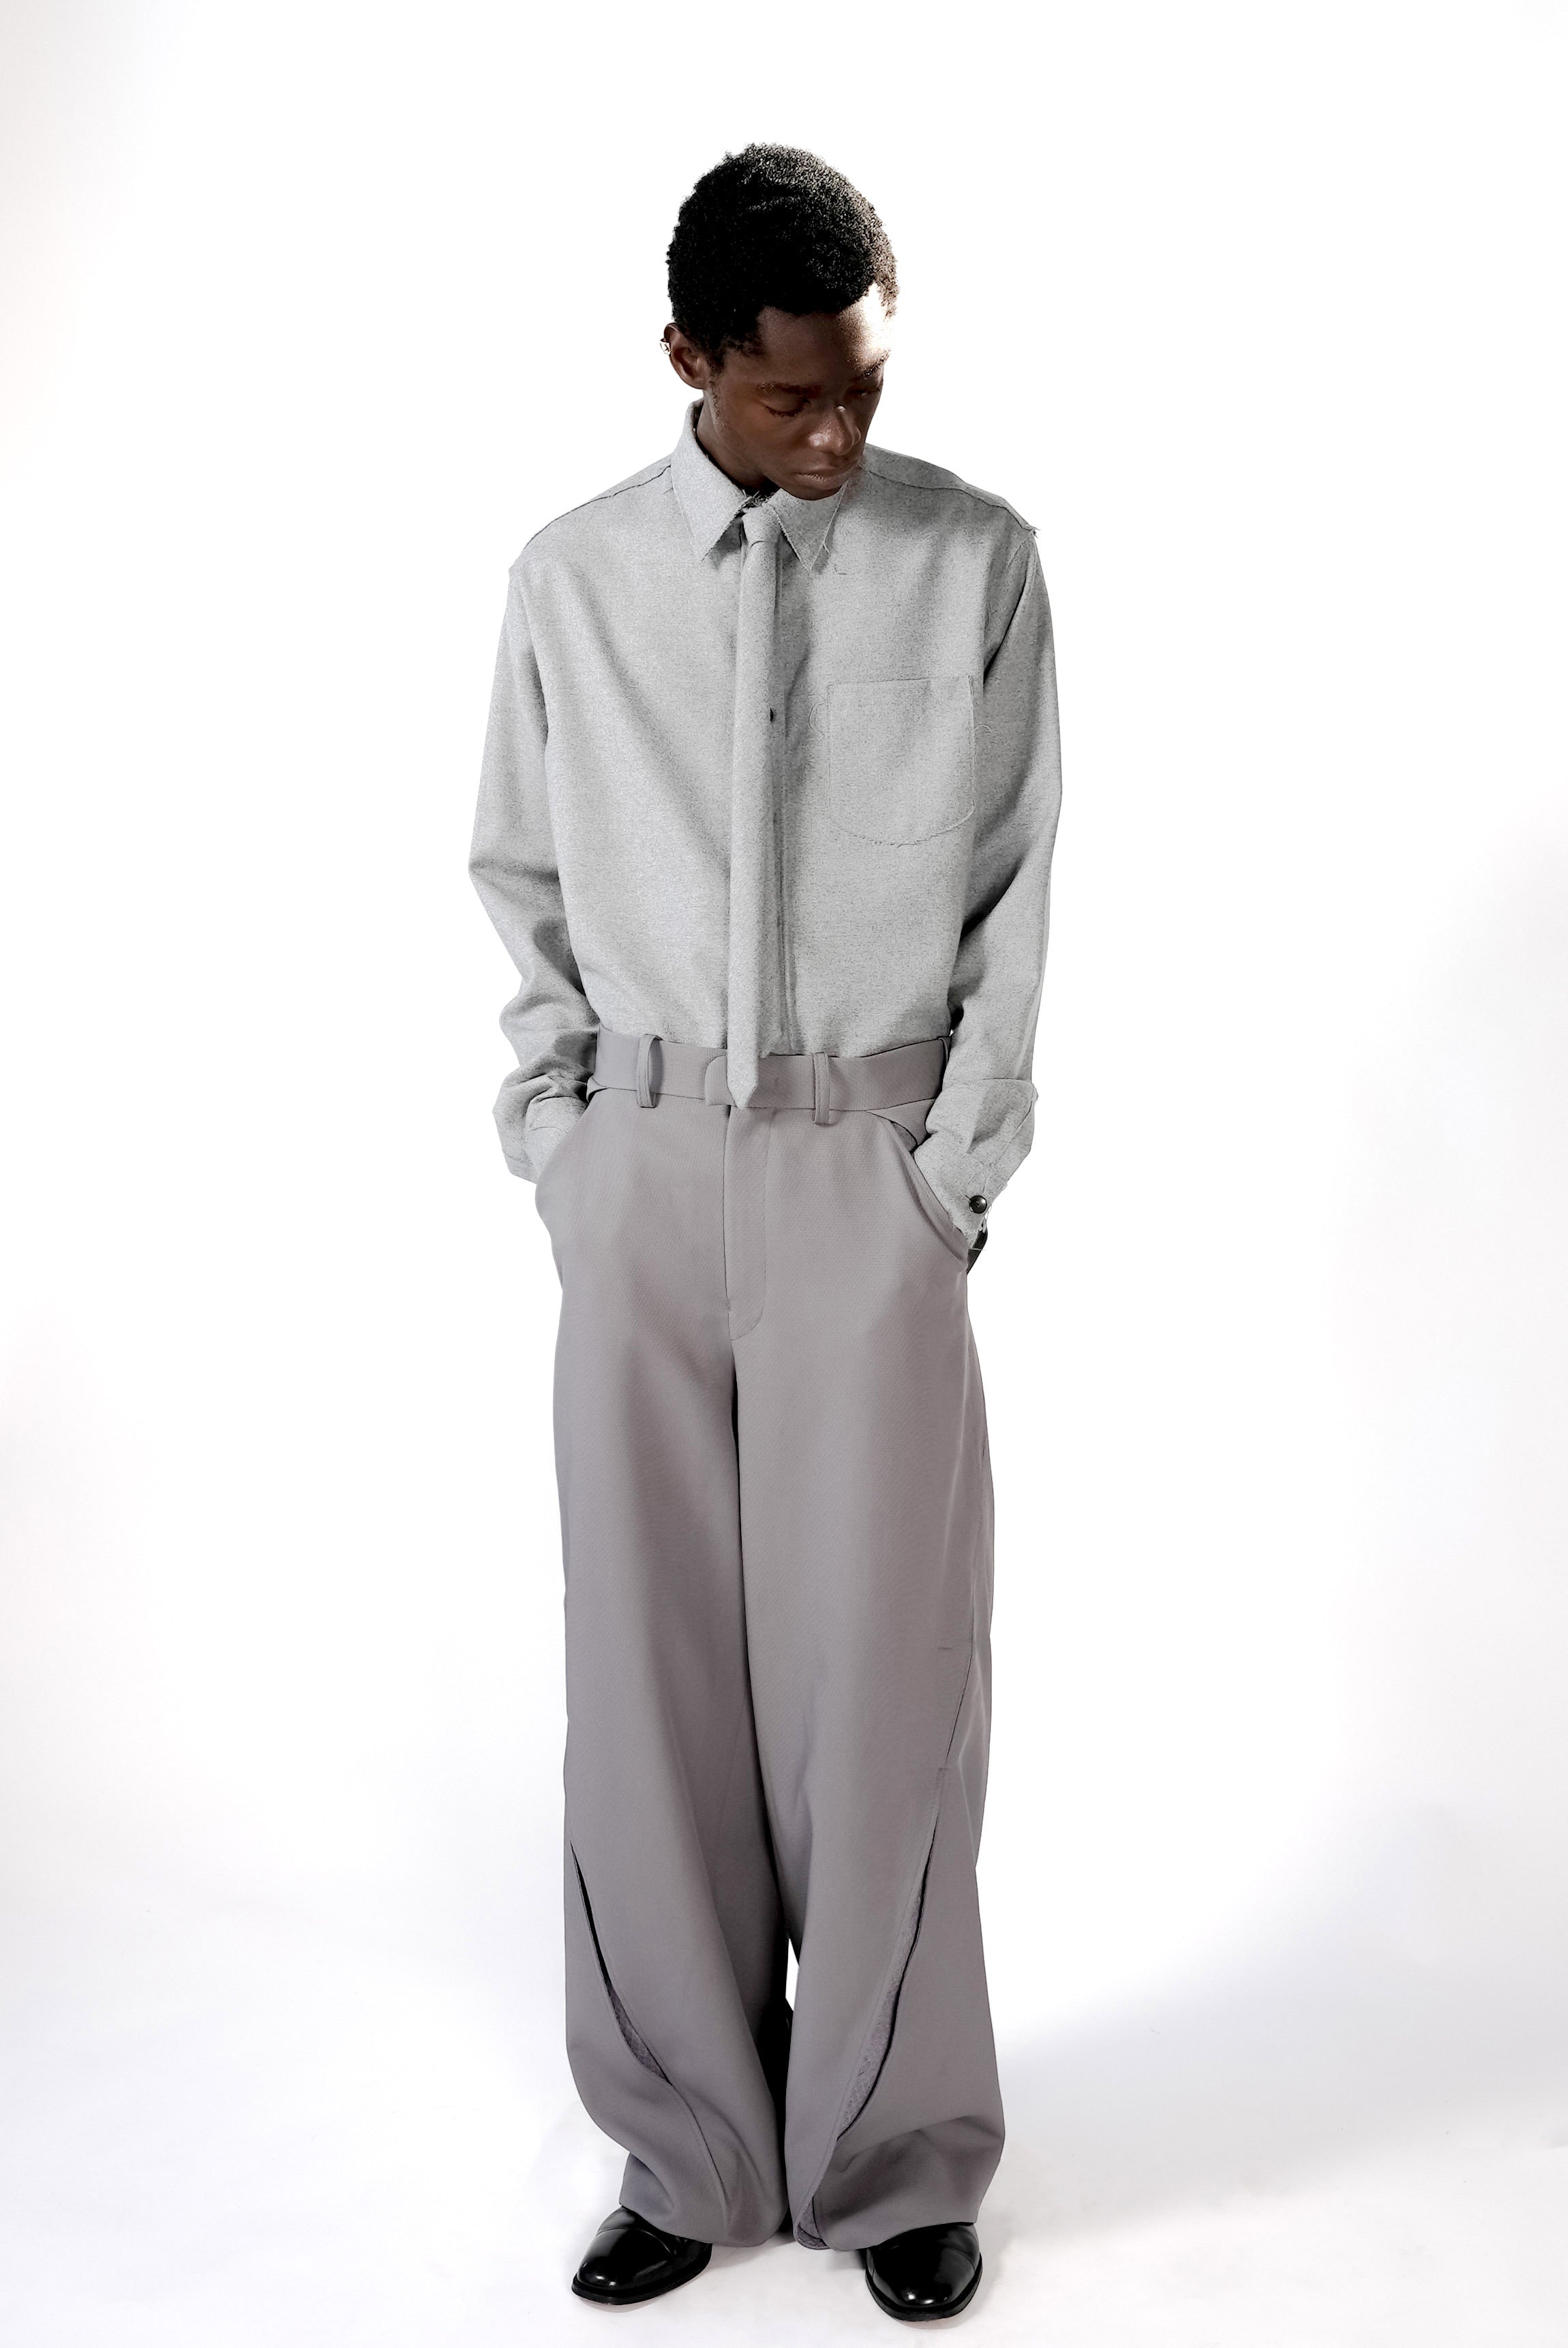 STRONG003 TROUSERS (GRAY)